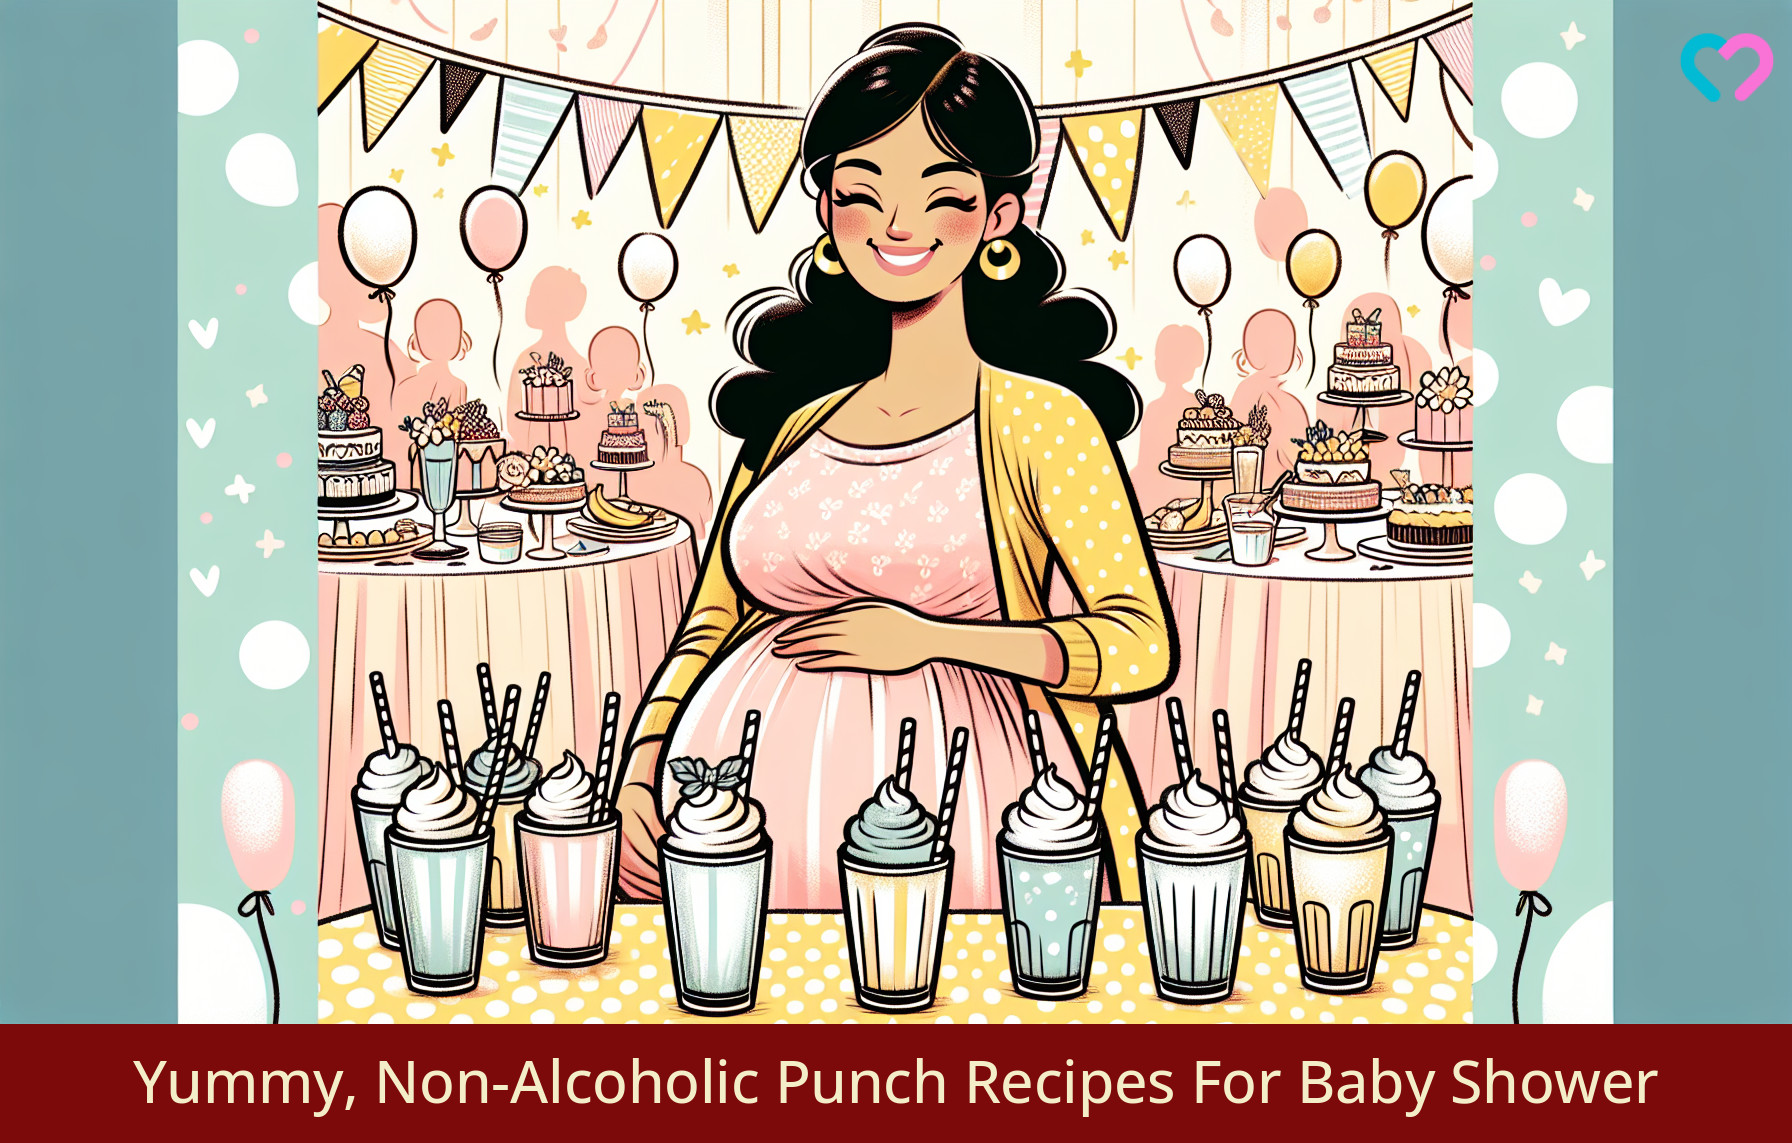 Non-Alcoholic Punch Recipes For Baby Shower_illustration